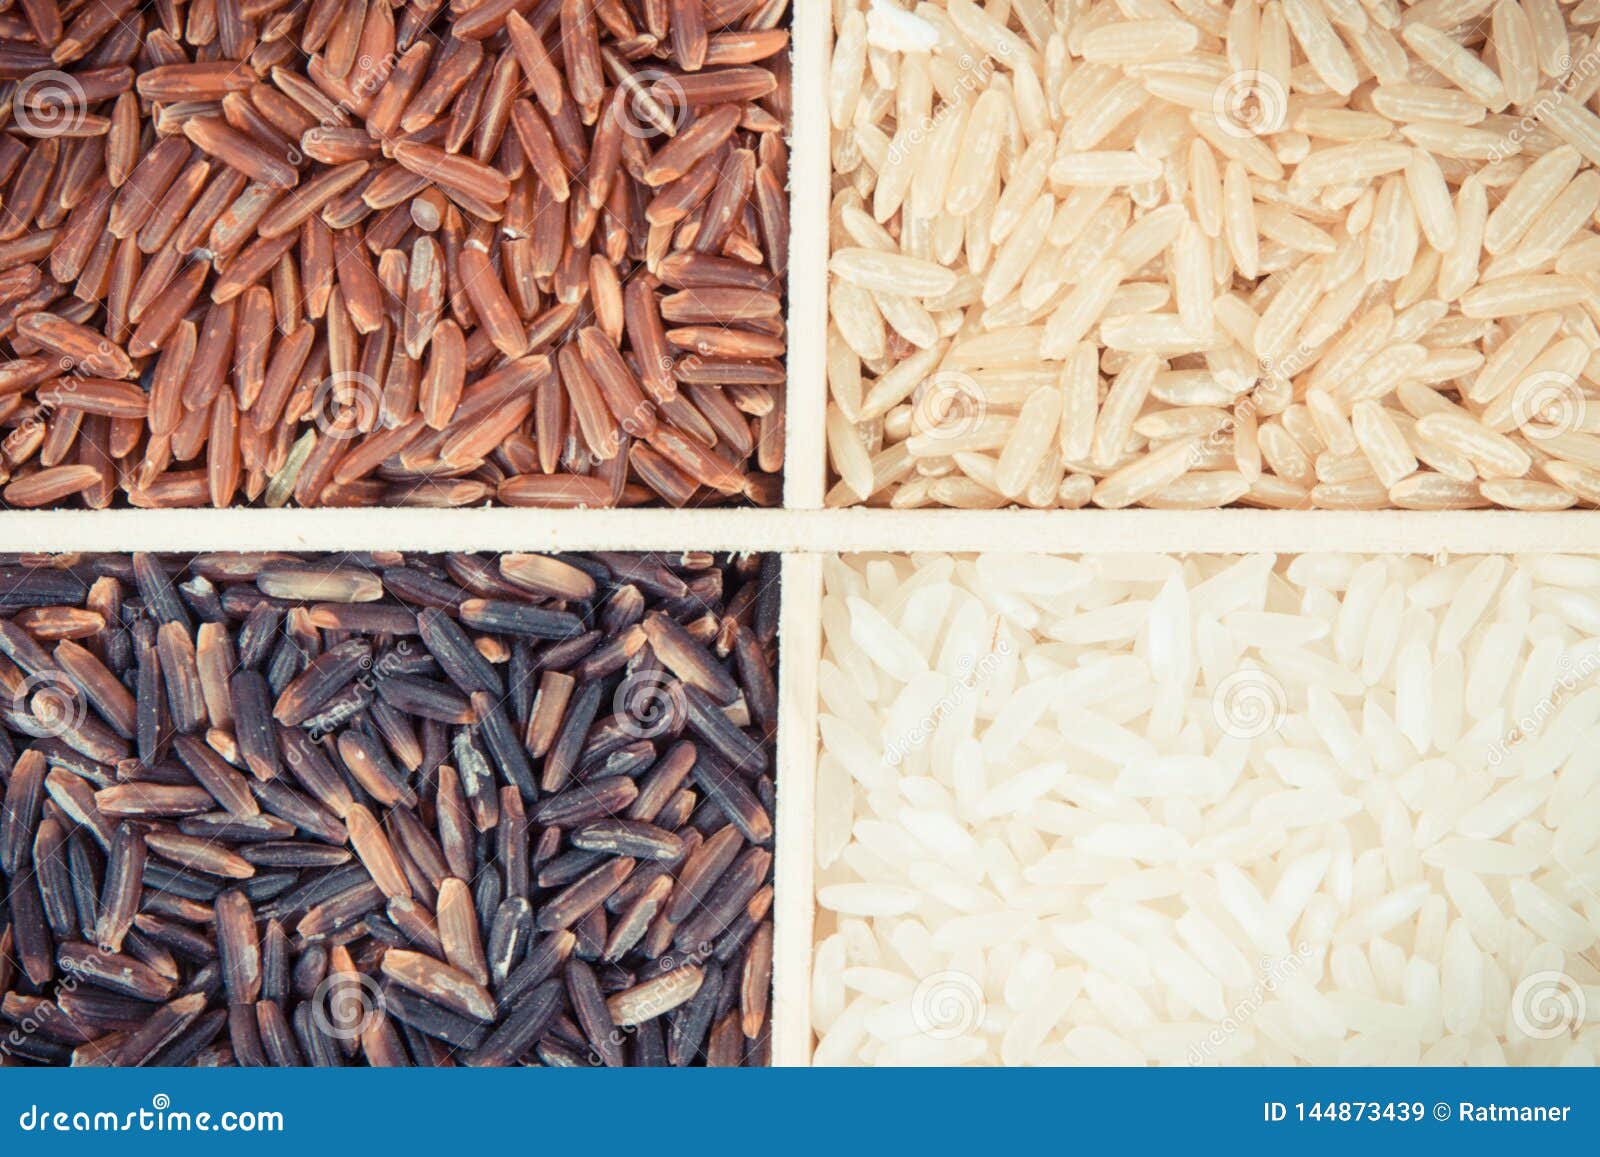 Heap Of White Brown Red And Black Rice Healthy Nutrition Concept Stock Image Image Of Vitamin Asian 144873439